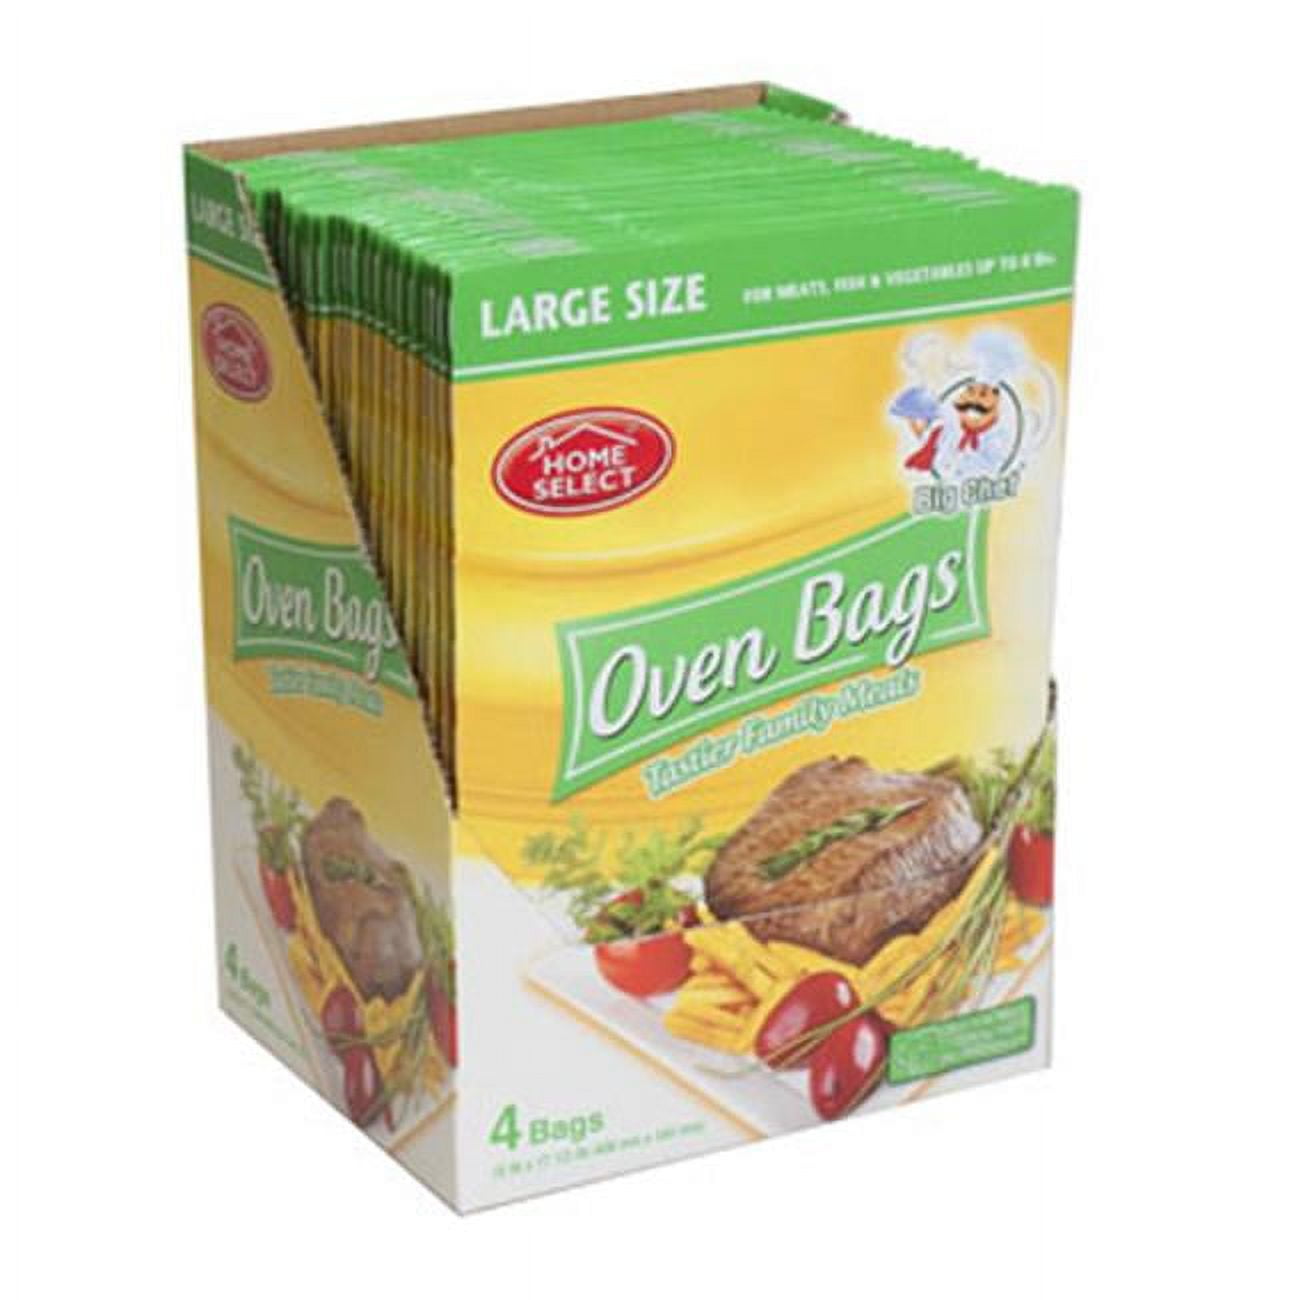 OVEN BAGS 4CT LARGE SIZE IN 24PC COUNTER DISPLAY HOME SELECT